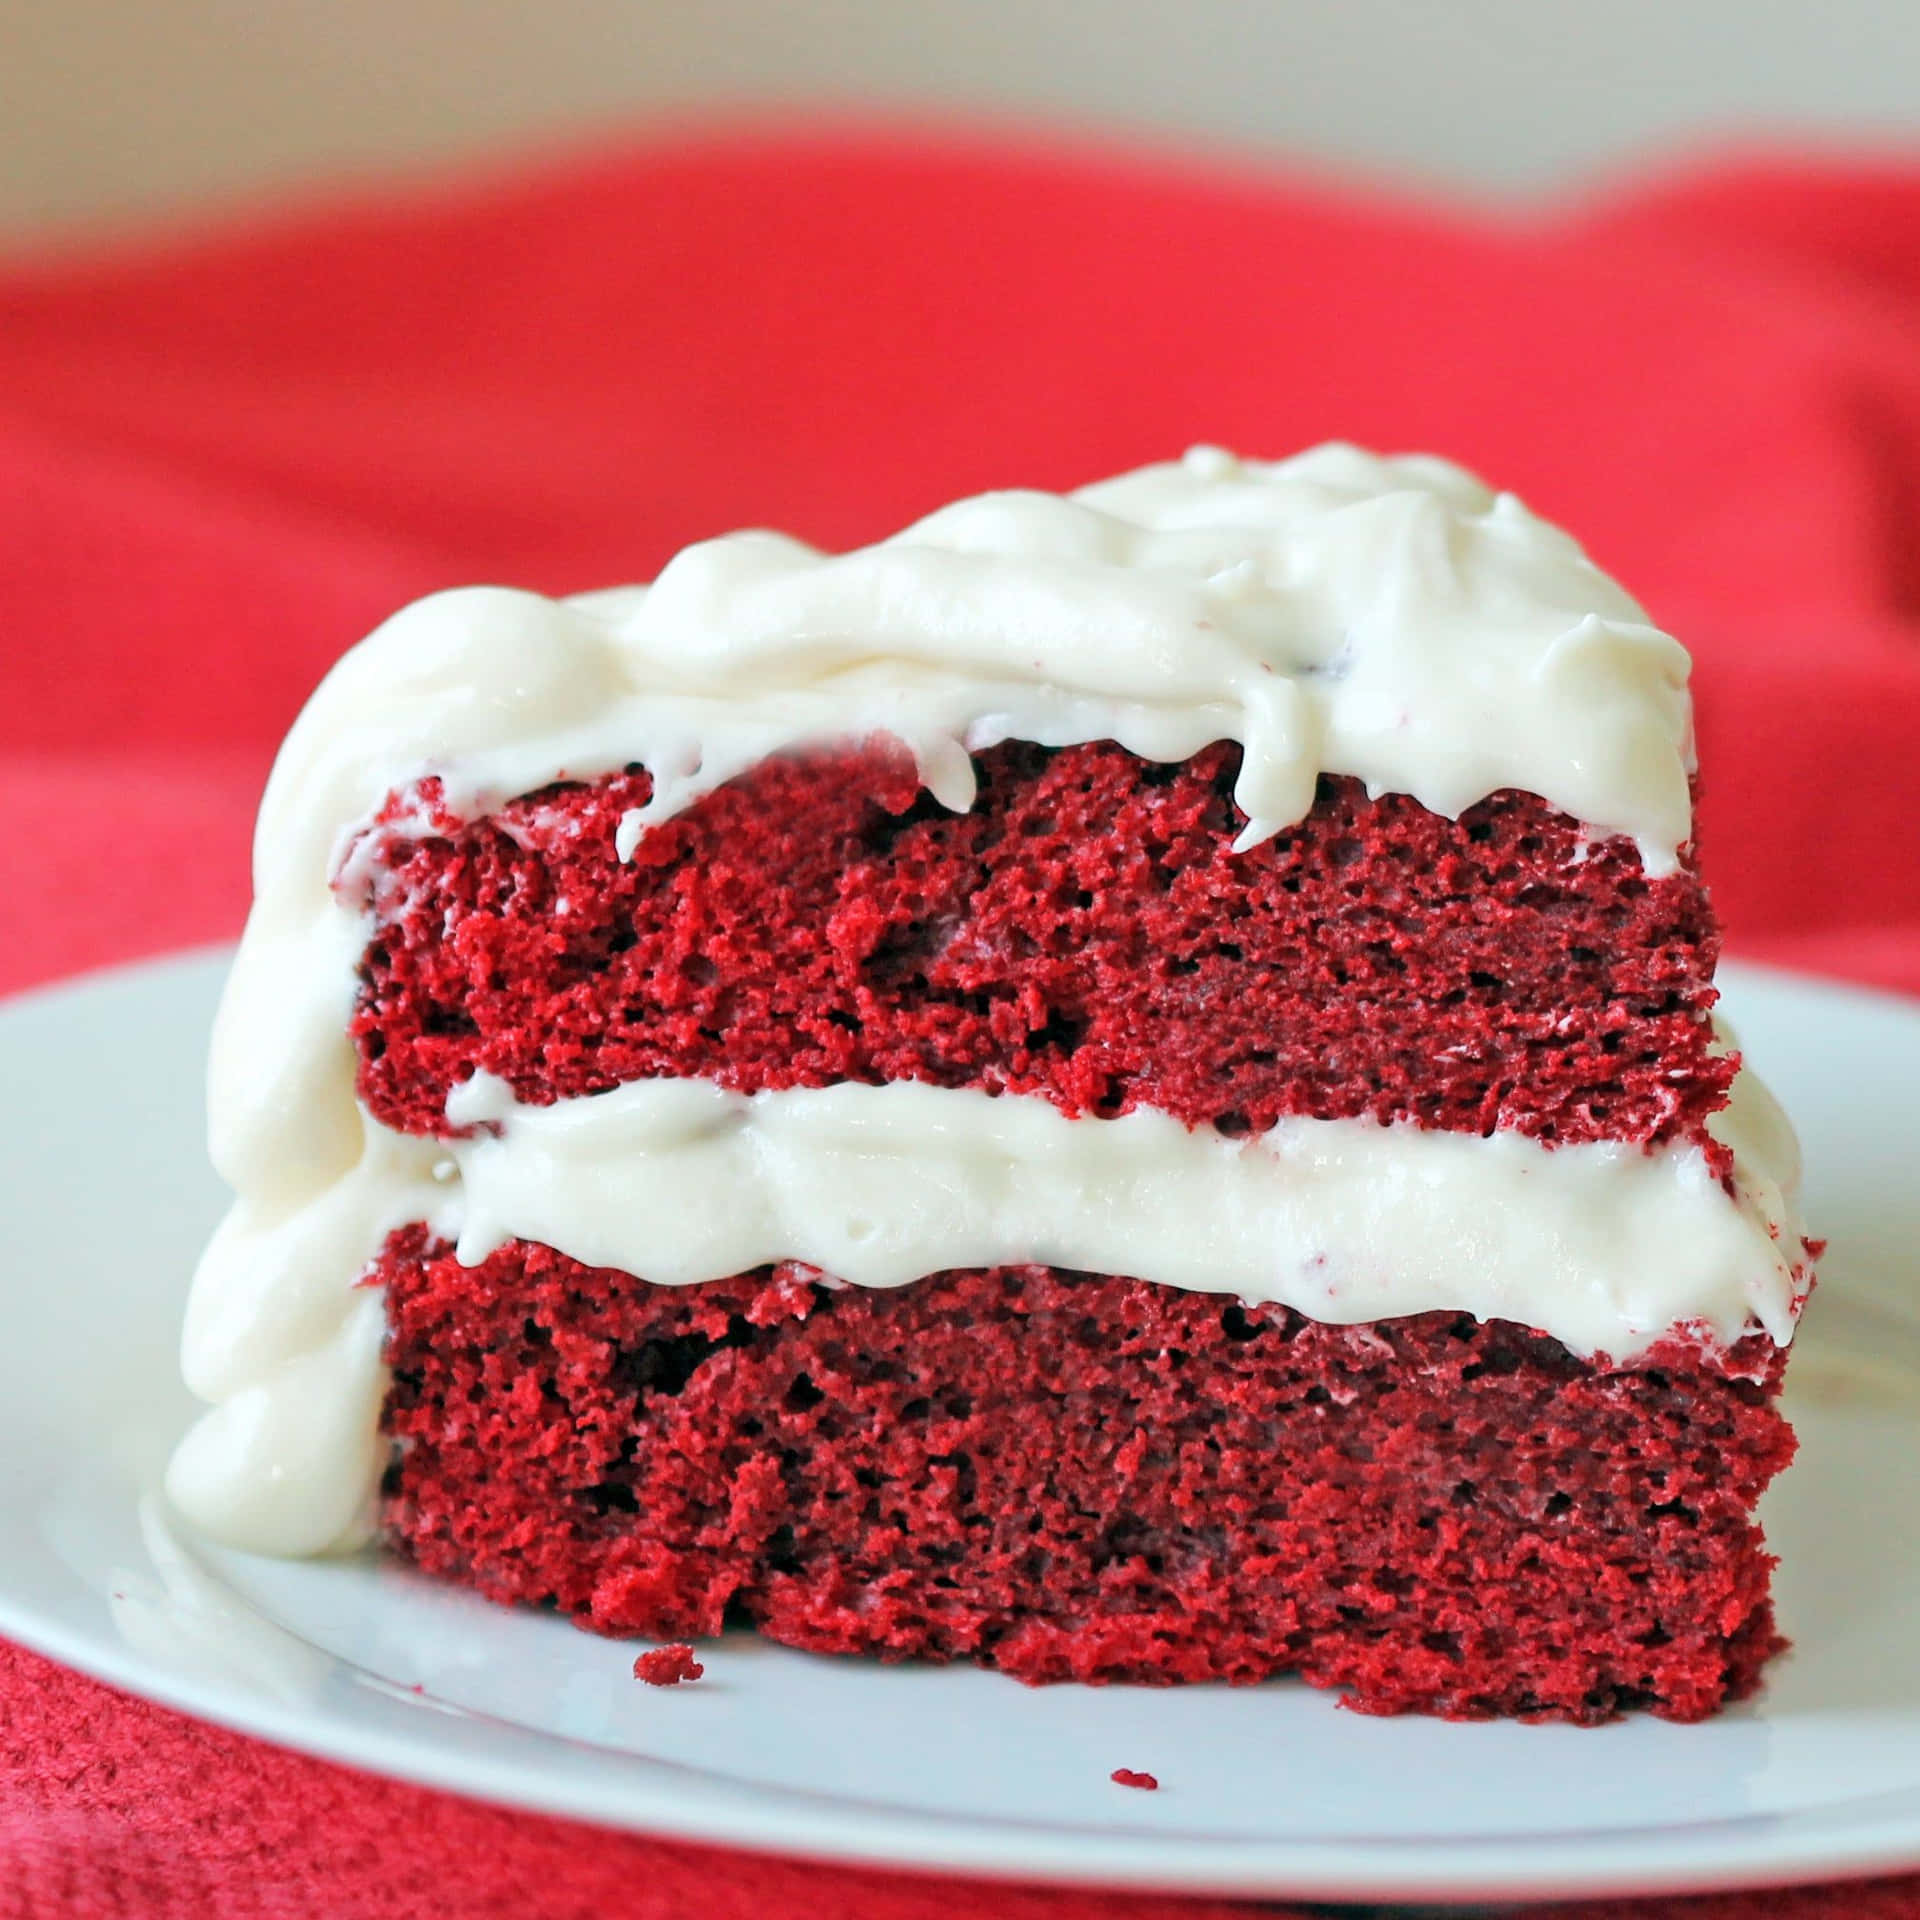 Scrumptious Red Velvet Cake with Cream Cheese Frosting Wallpaper